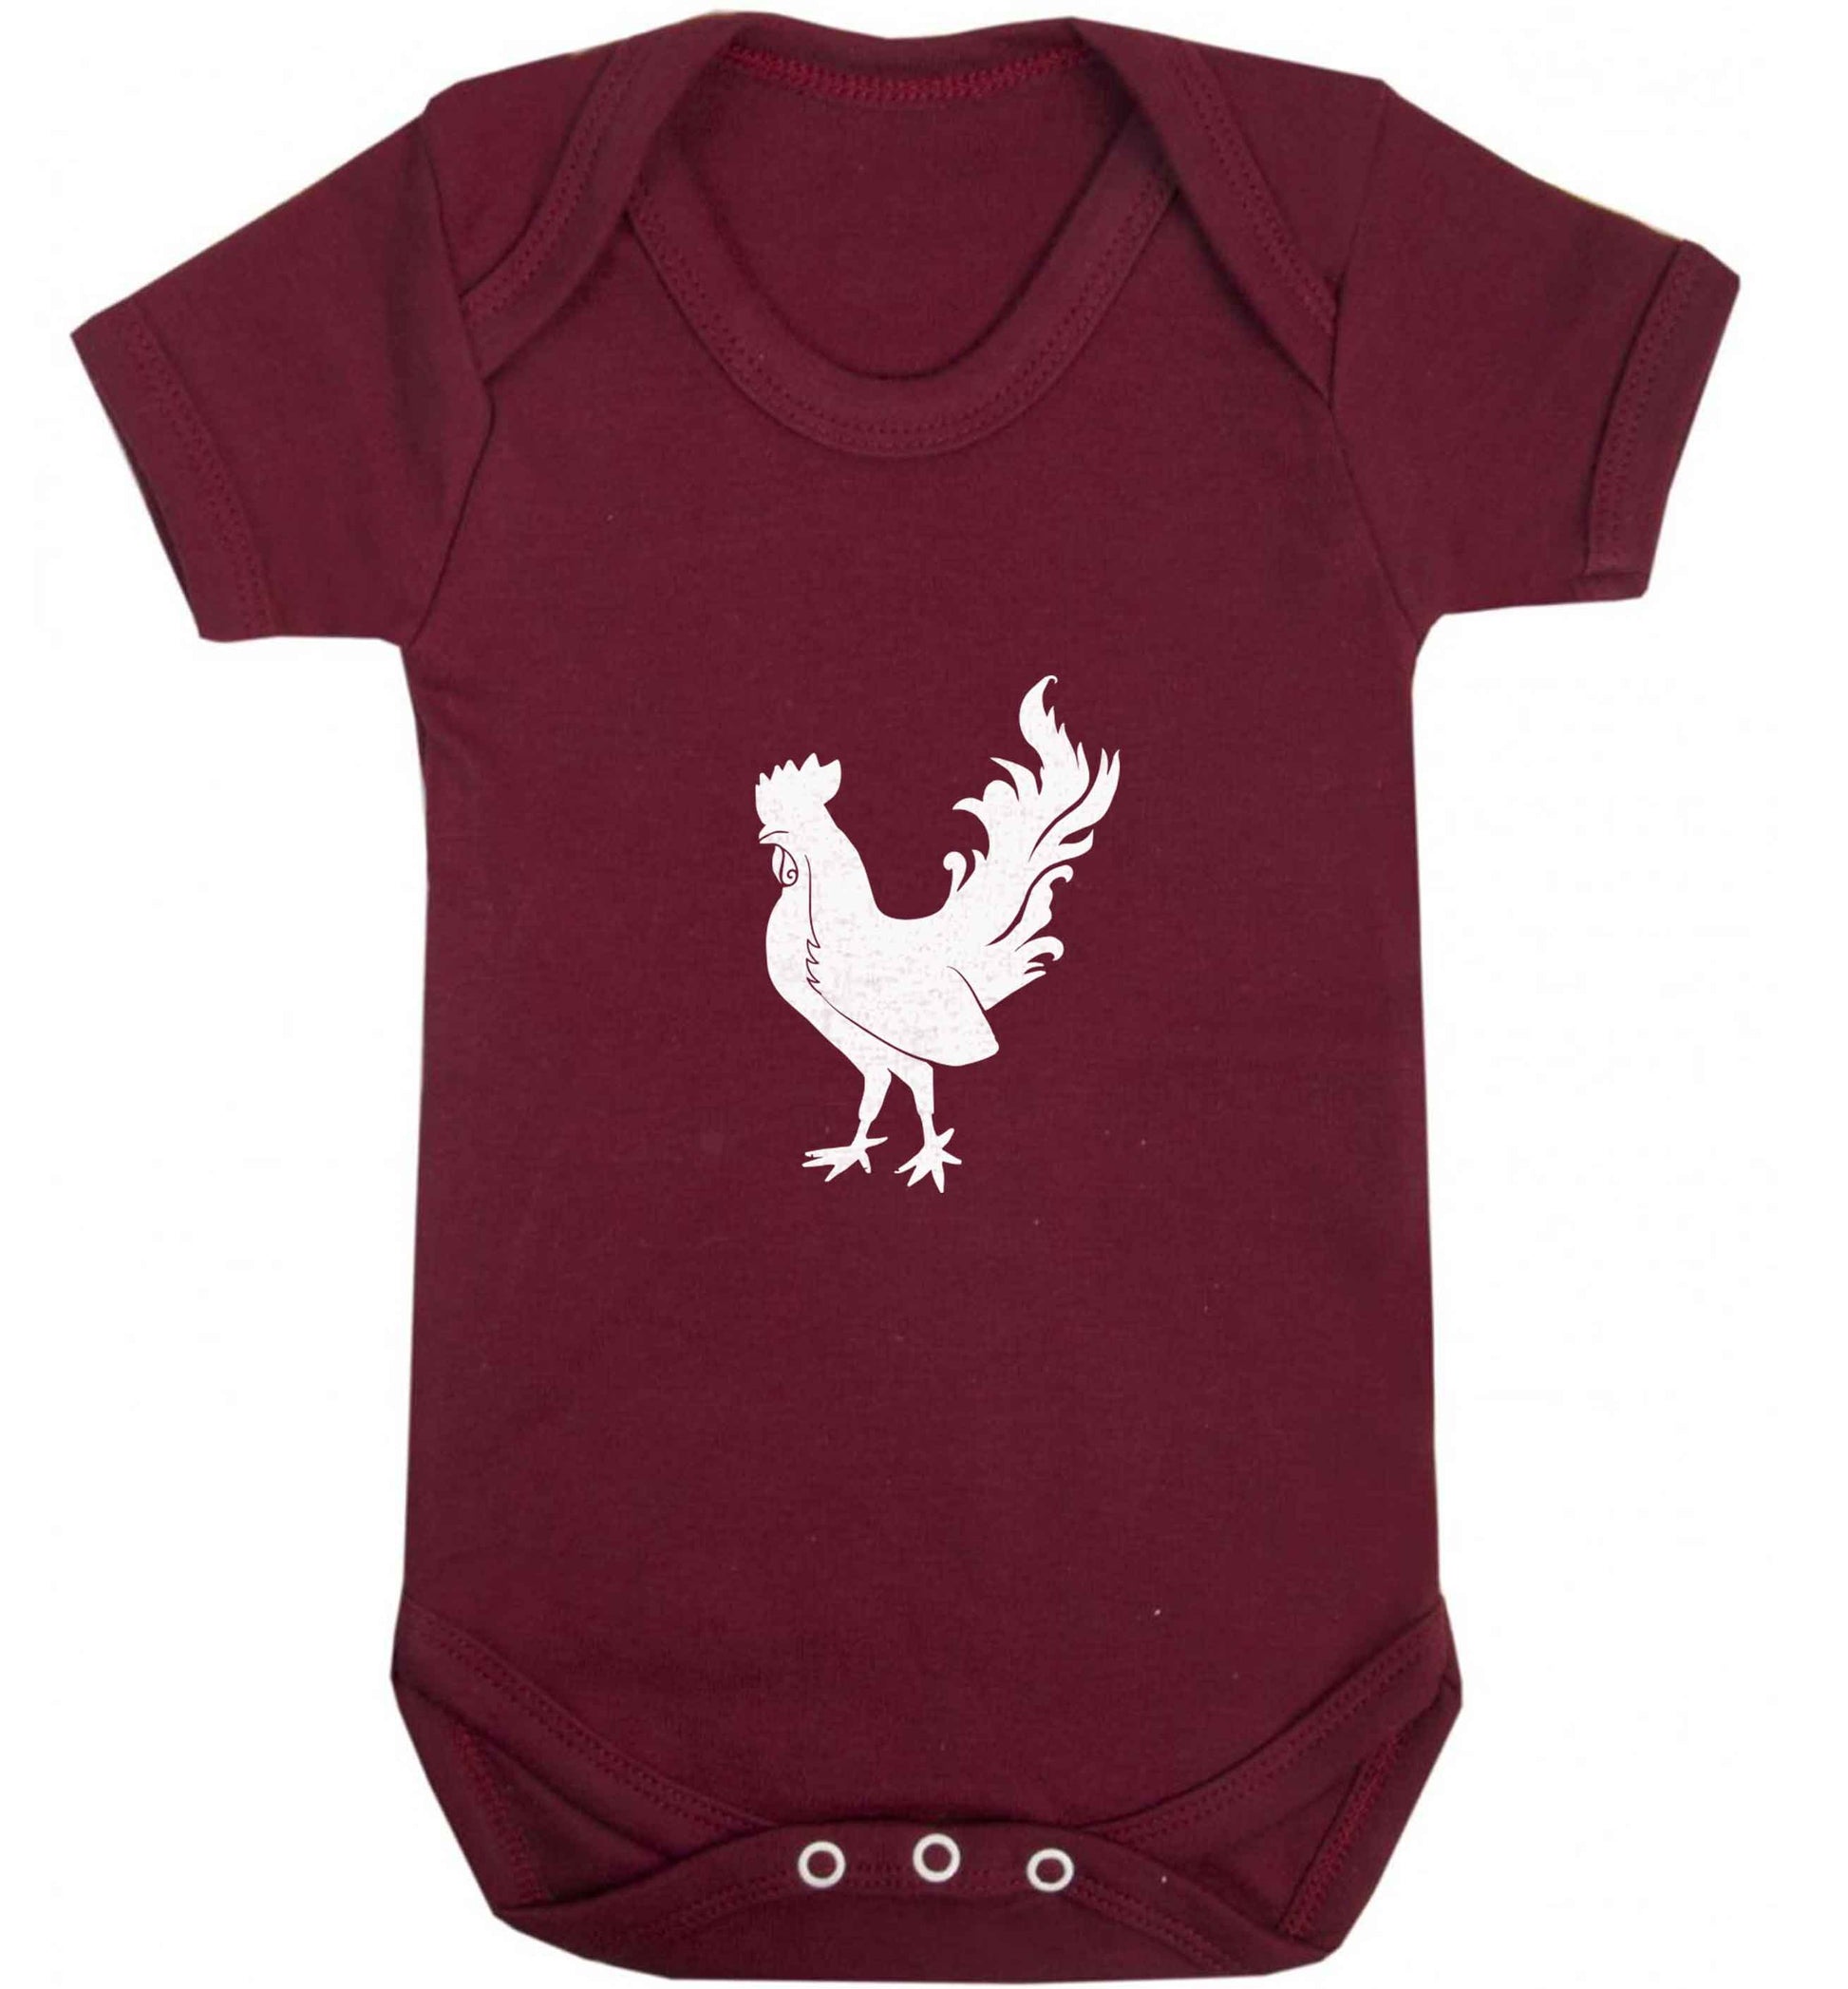 Rooster baby vest maroon 18-24 months